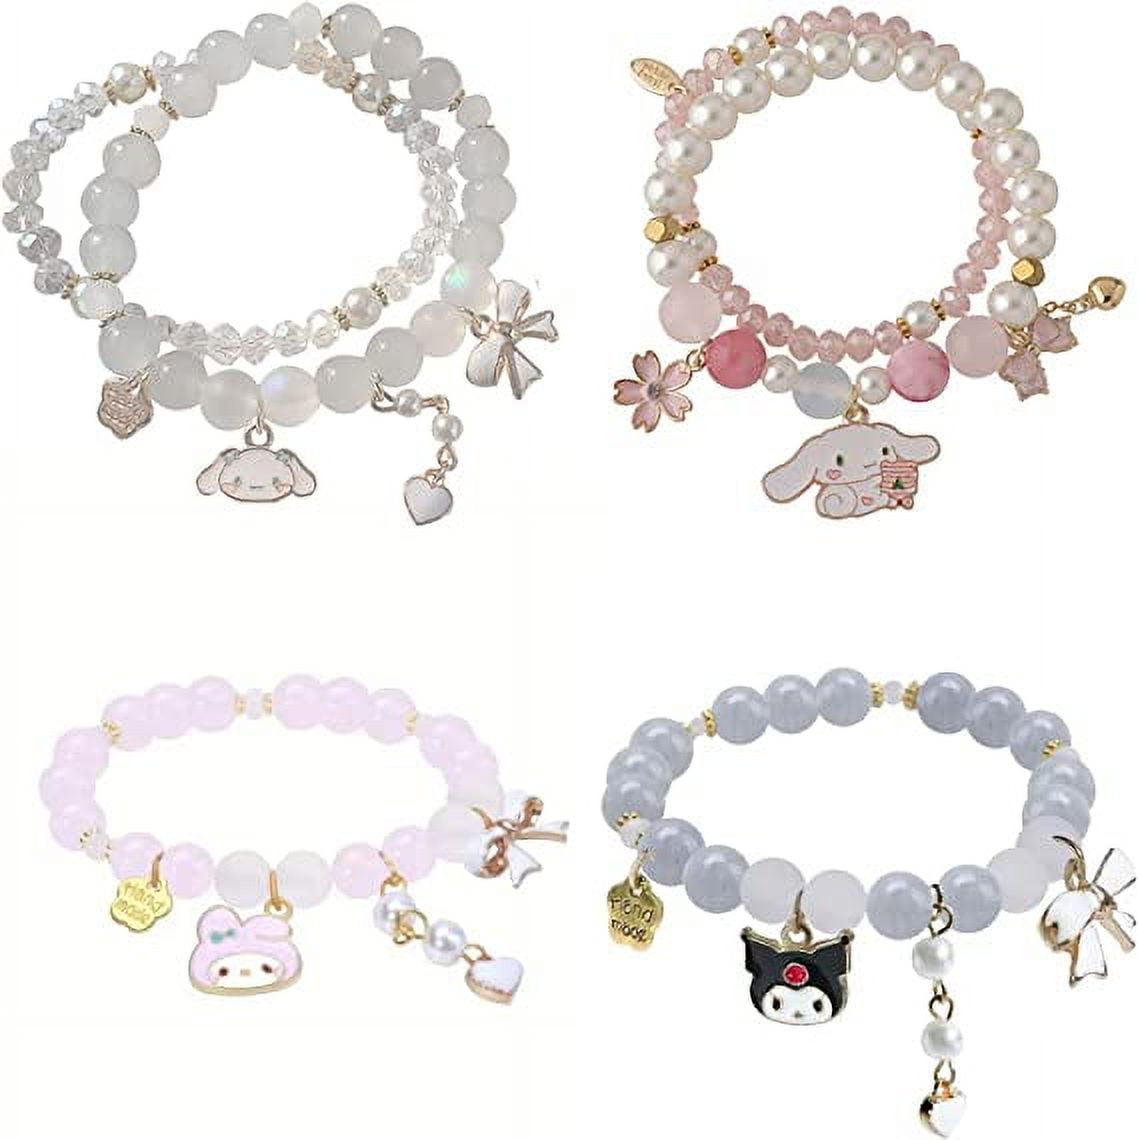 DS 4pcs Beaded Charm Bracelets for Teen Girls Dainty Cute Cartoon Crystal Beads Pearl Bracelets Anklets Set for Woman and Girls Adjustable Stretch